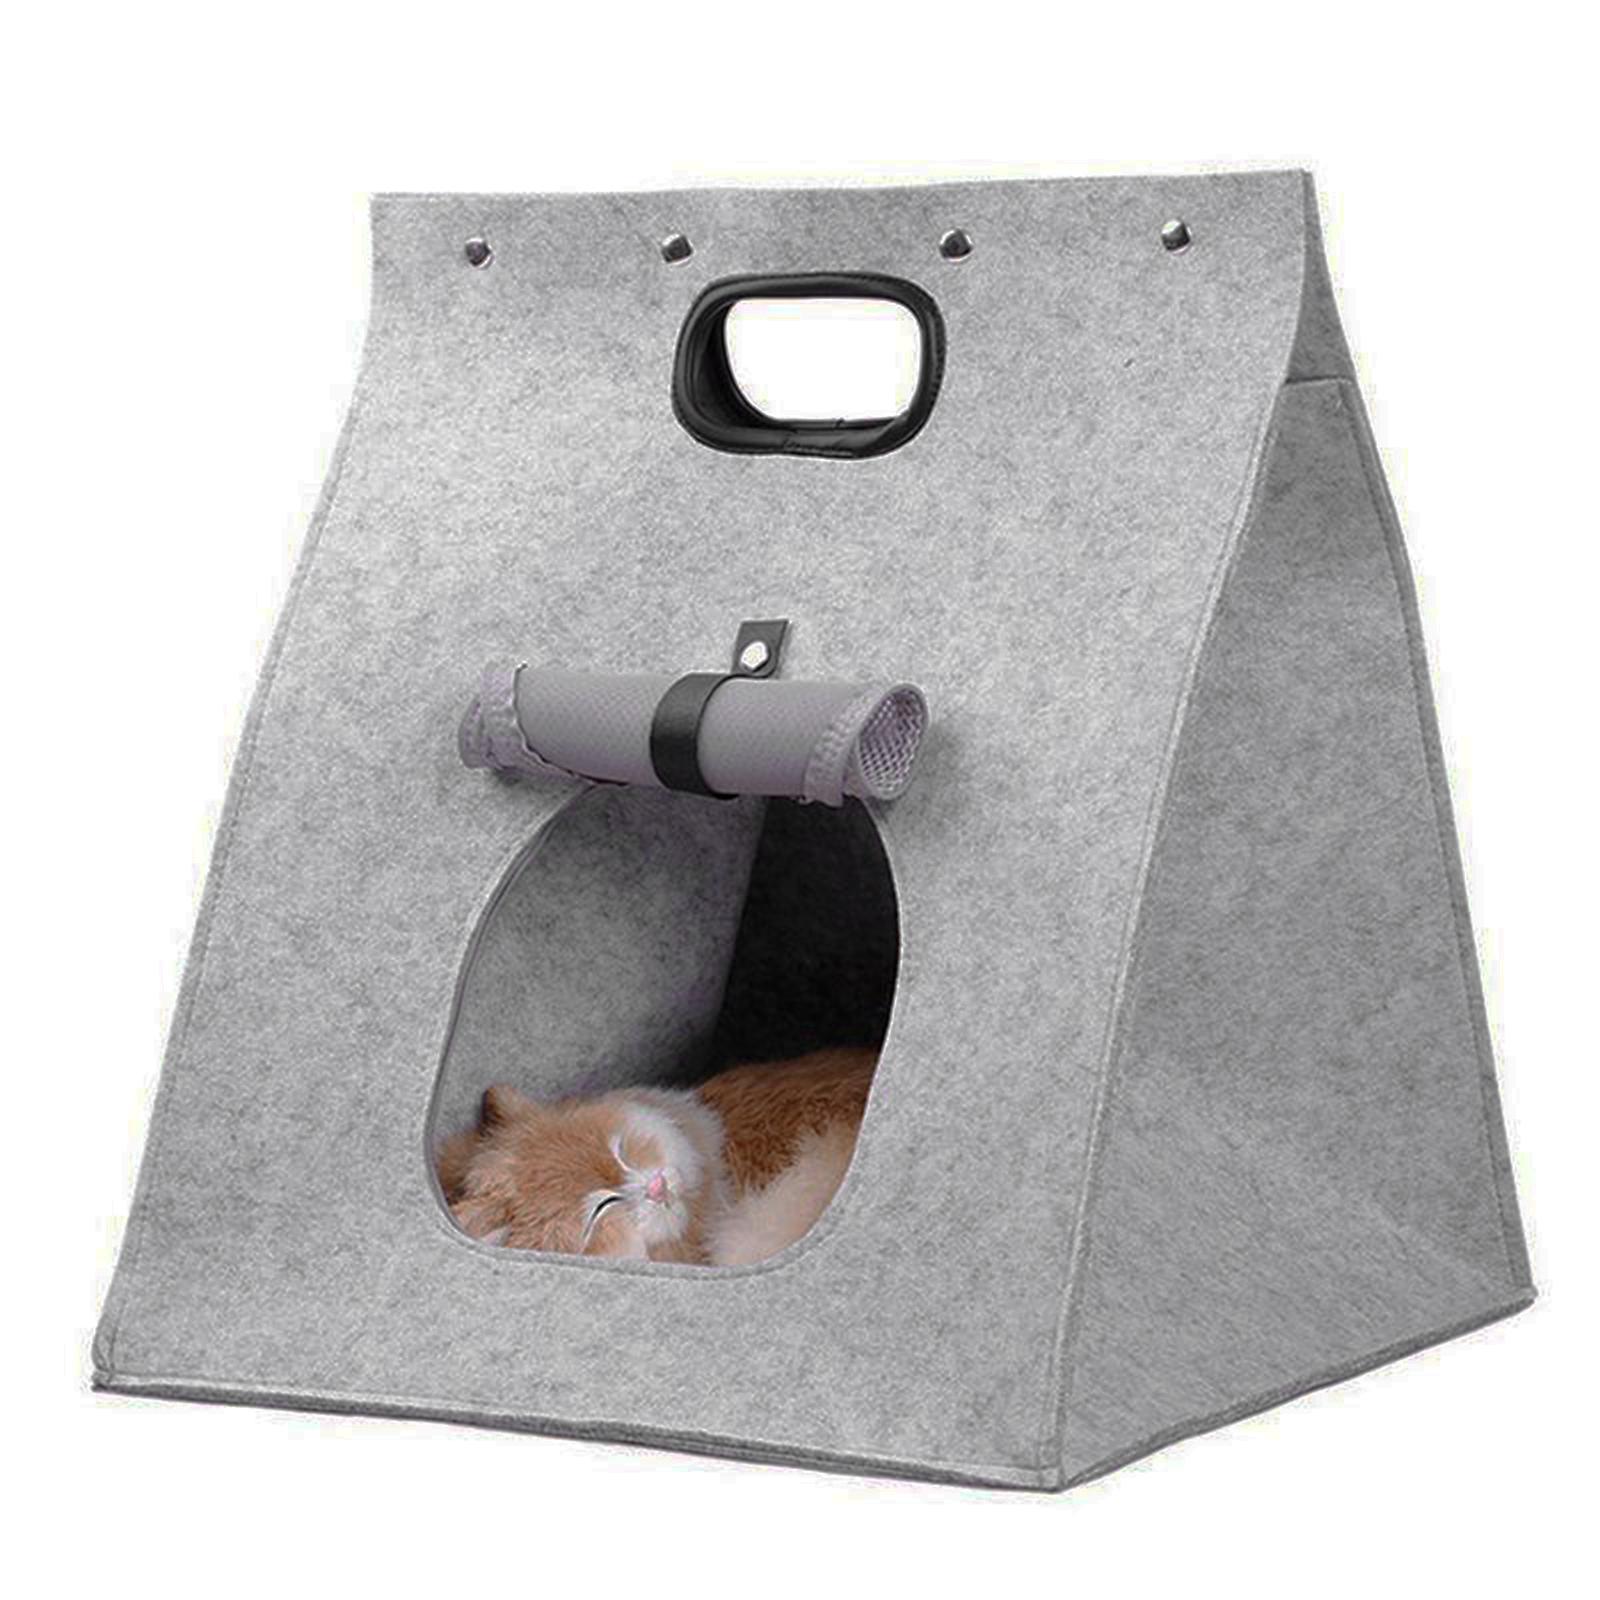 Aimishion Cat Travel Carrier Bag 16 x16 x19 Pet Carrier for Camping Small